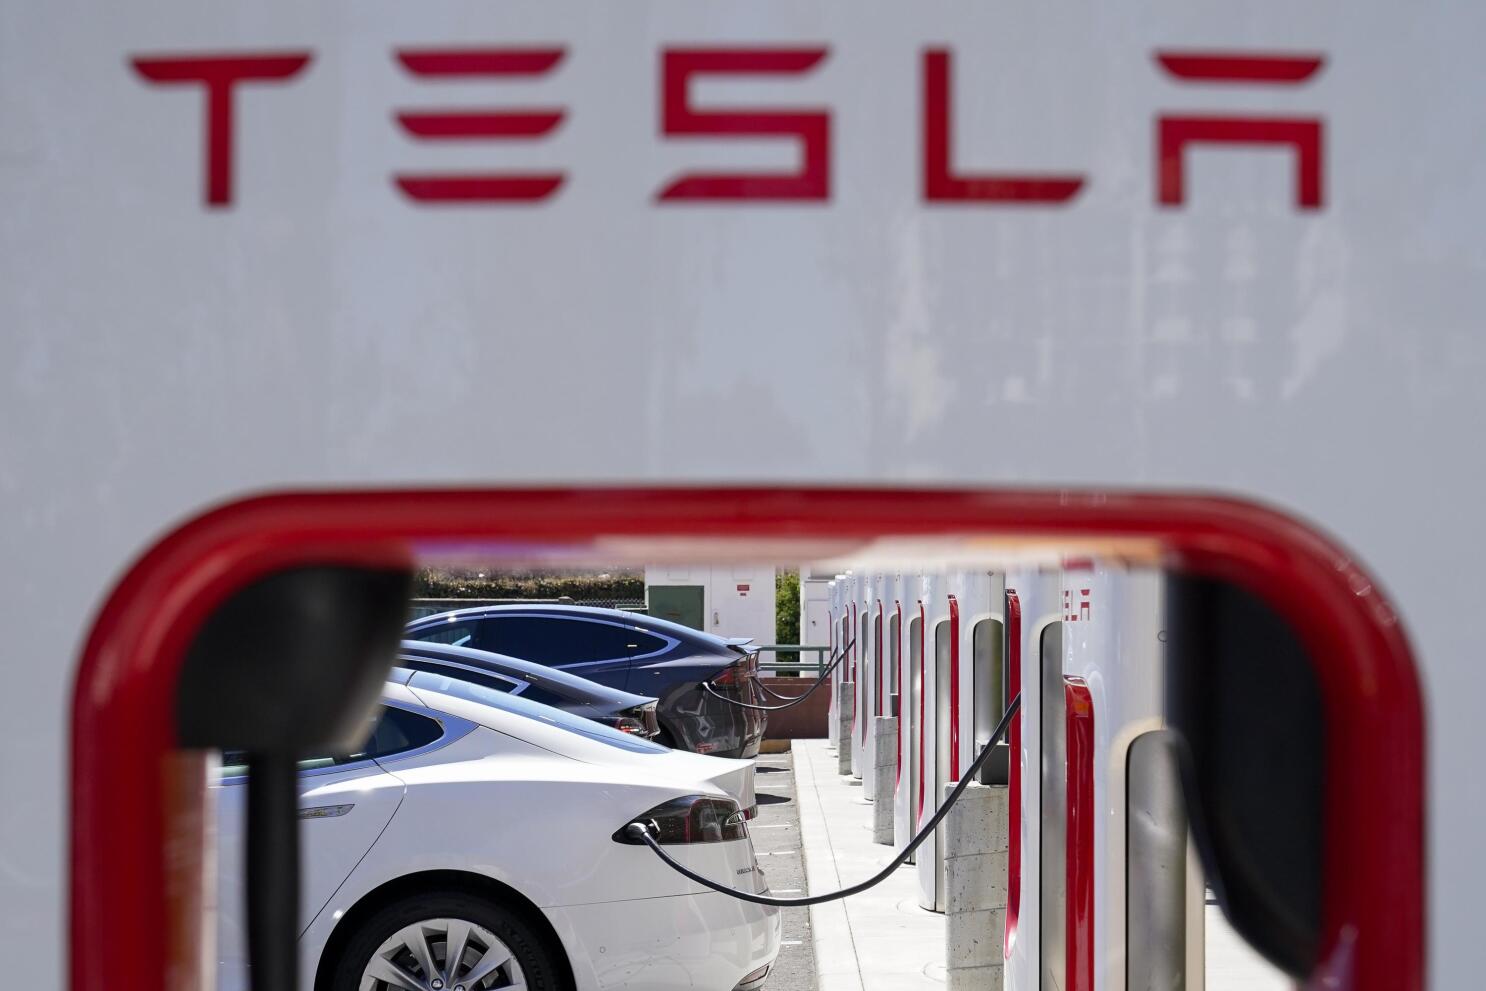 Tesla's EV chargers add to company's electric vehicle market dominance